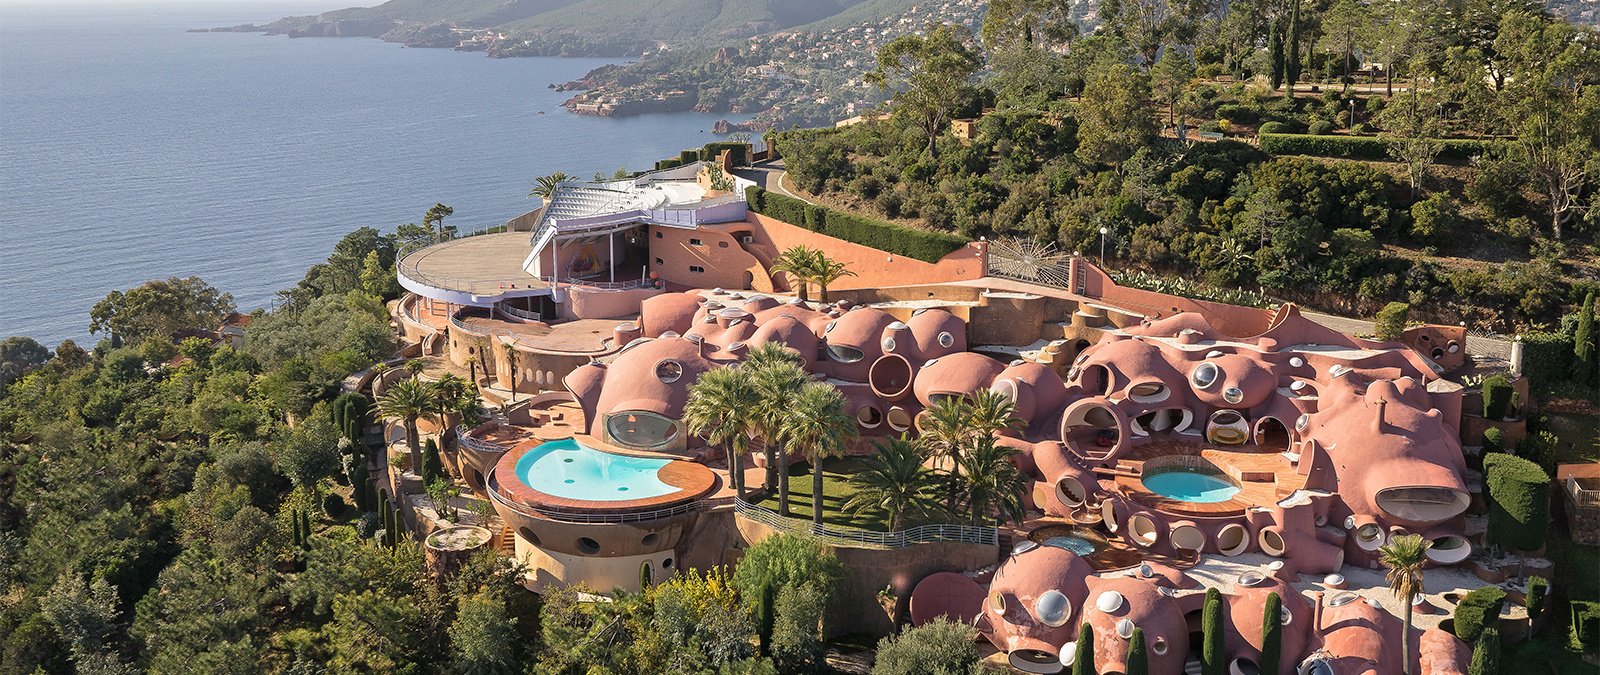 One of the world’s most exclusive homes: Le Palais Bulles (Bubble Palace) on the French Riviera